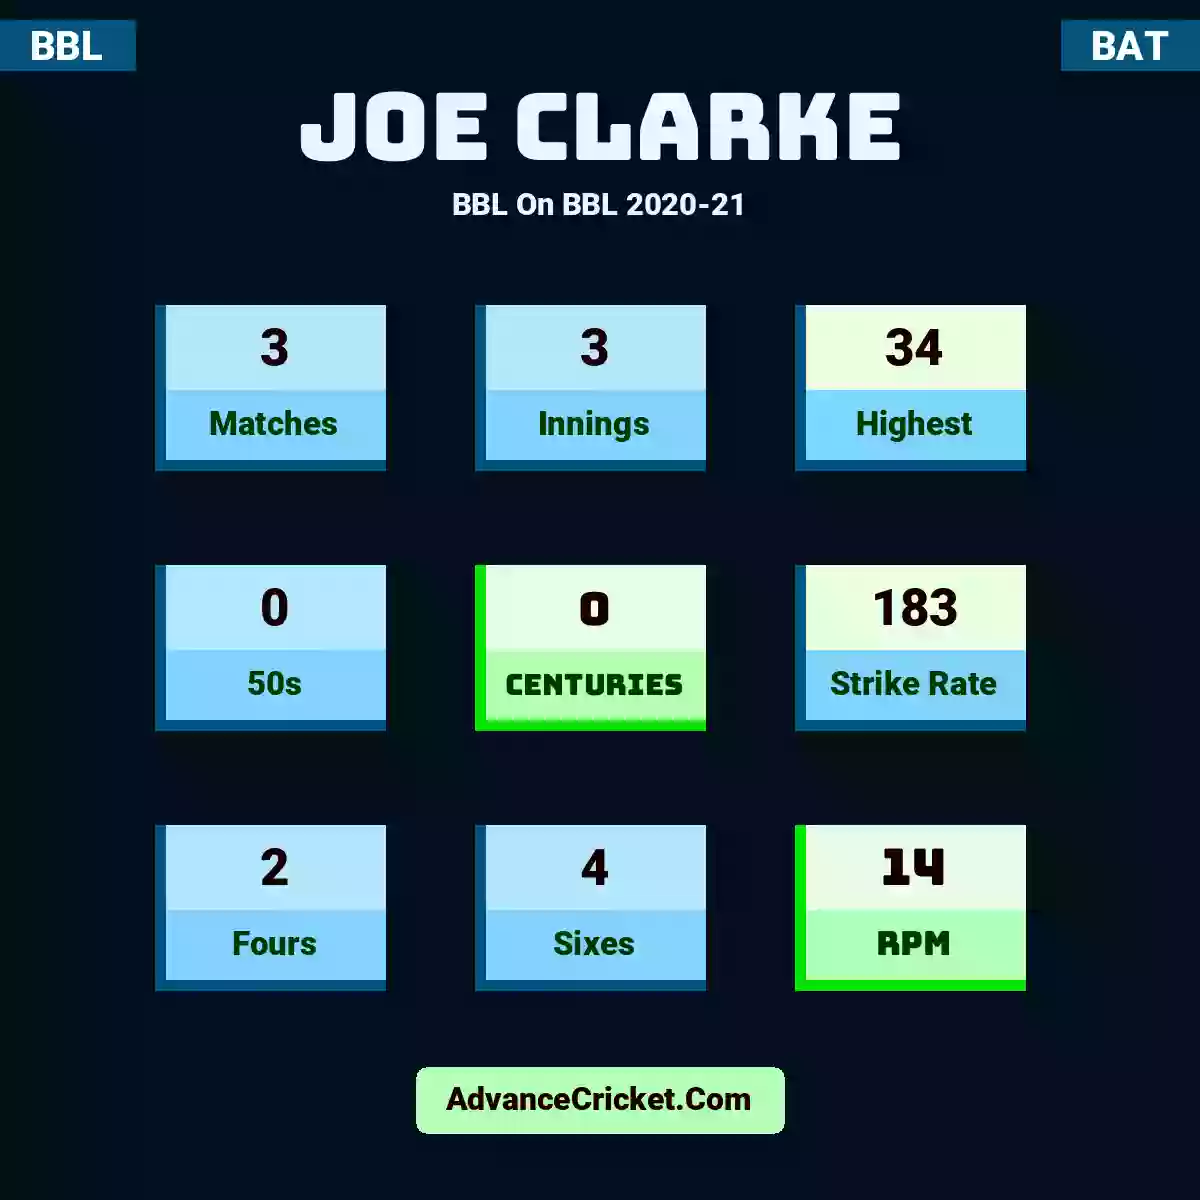 Joe Clarke BBL  On BBL 2020-21, Joe Clarke played 3 matches, scored 34 runs as highest, 0 half-centuries, and 0 centuries, with a strike rate of 183. J.Clarke hit 2 fours and 4 sixes, with an RPM of 14.